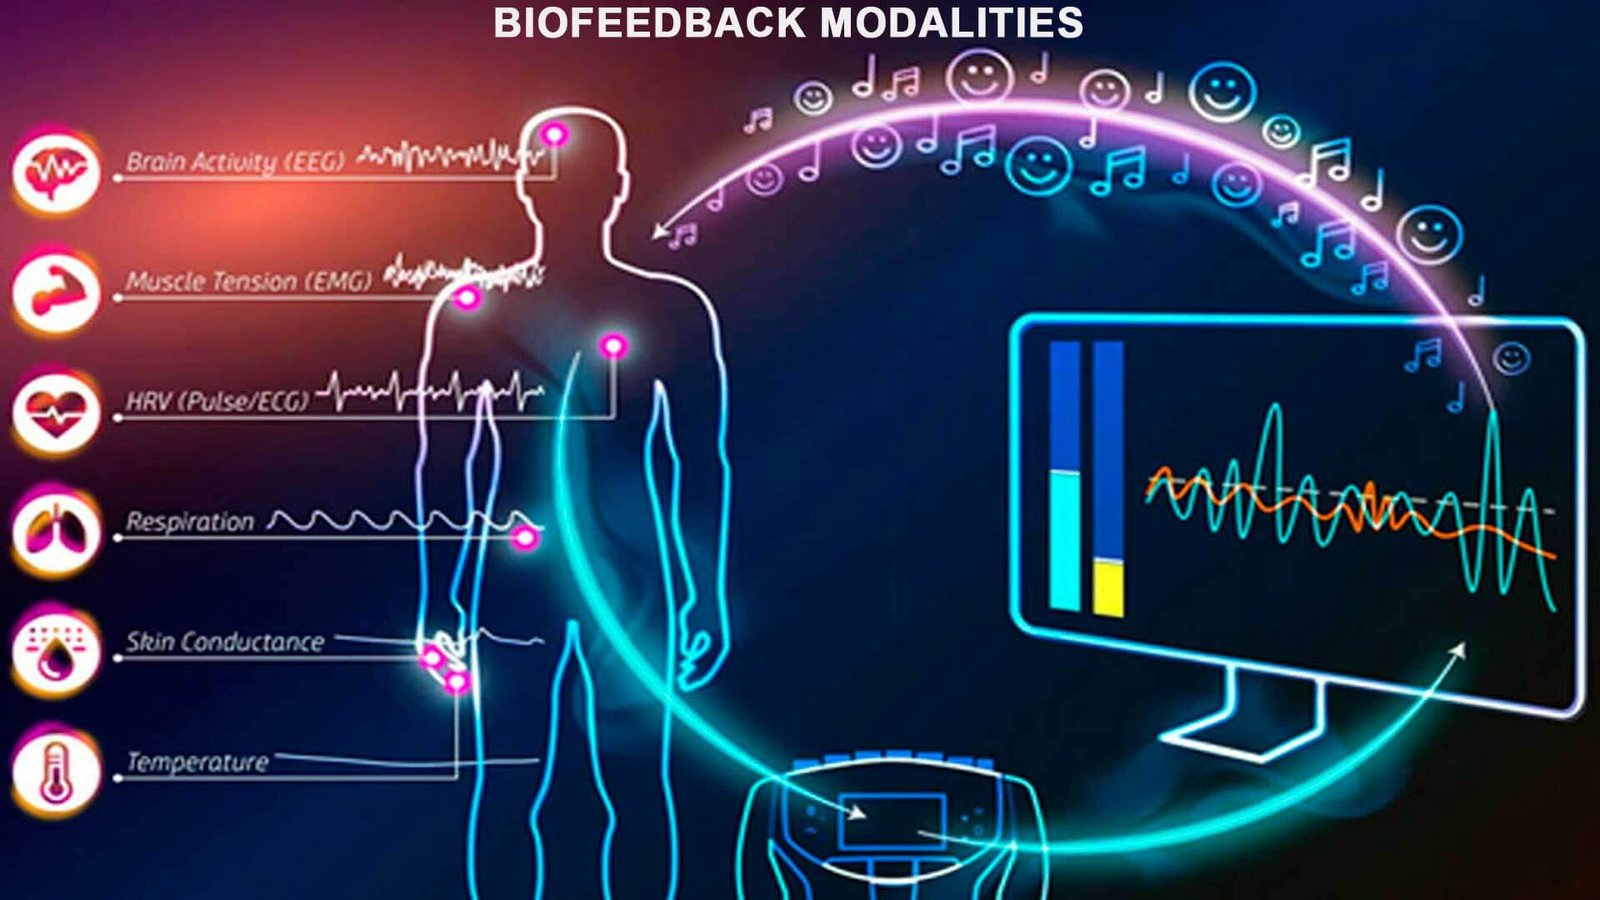 Therapeutic Biofeedback, Modalities and Sphere of Use